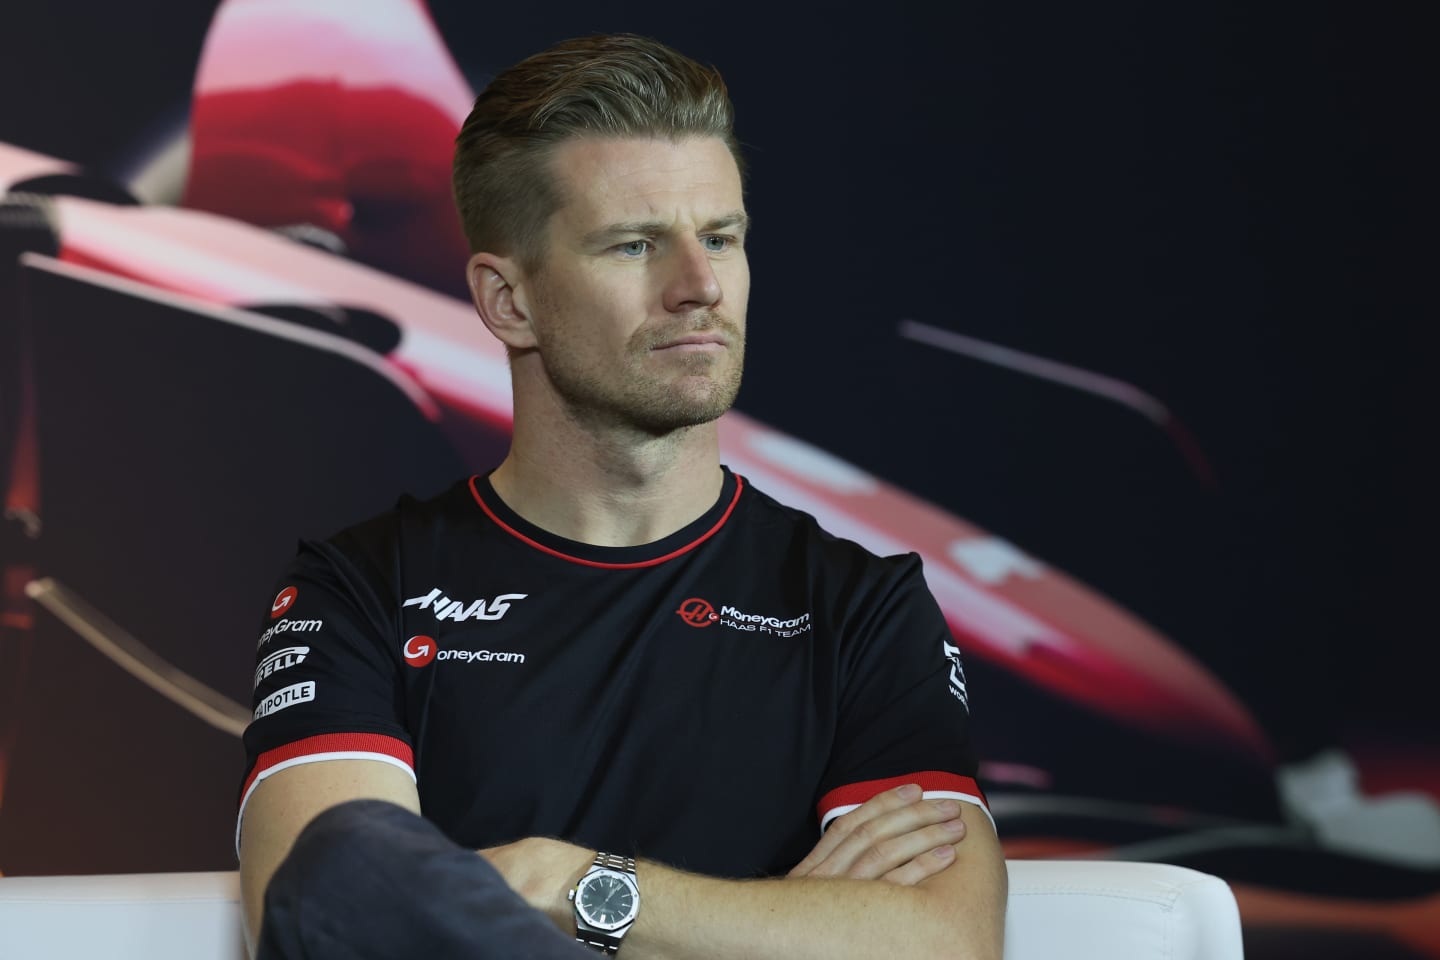 SHANGHAI, CHINA - APRIL 18: Nico Hulkenberg of Germany and Haas F1 attends the Drivers Press